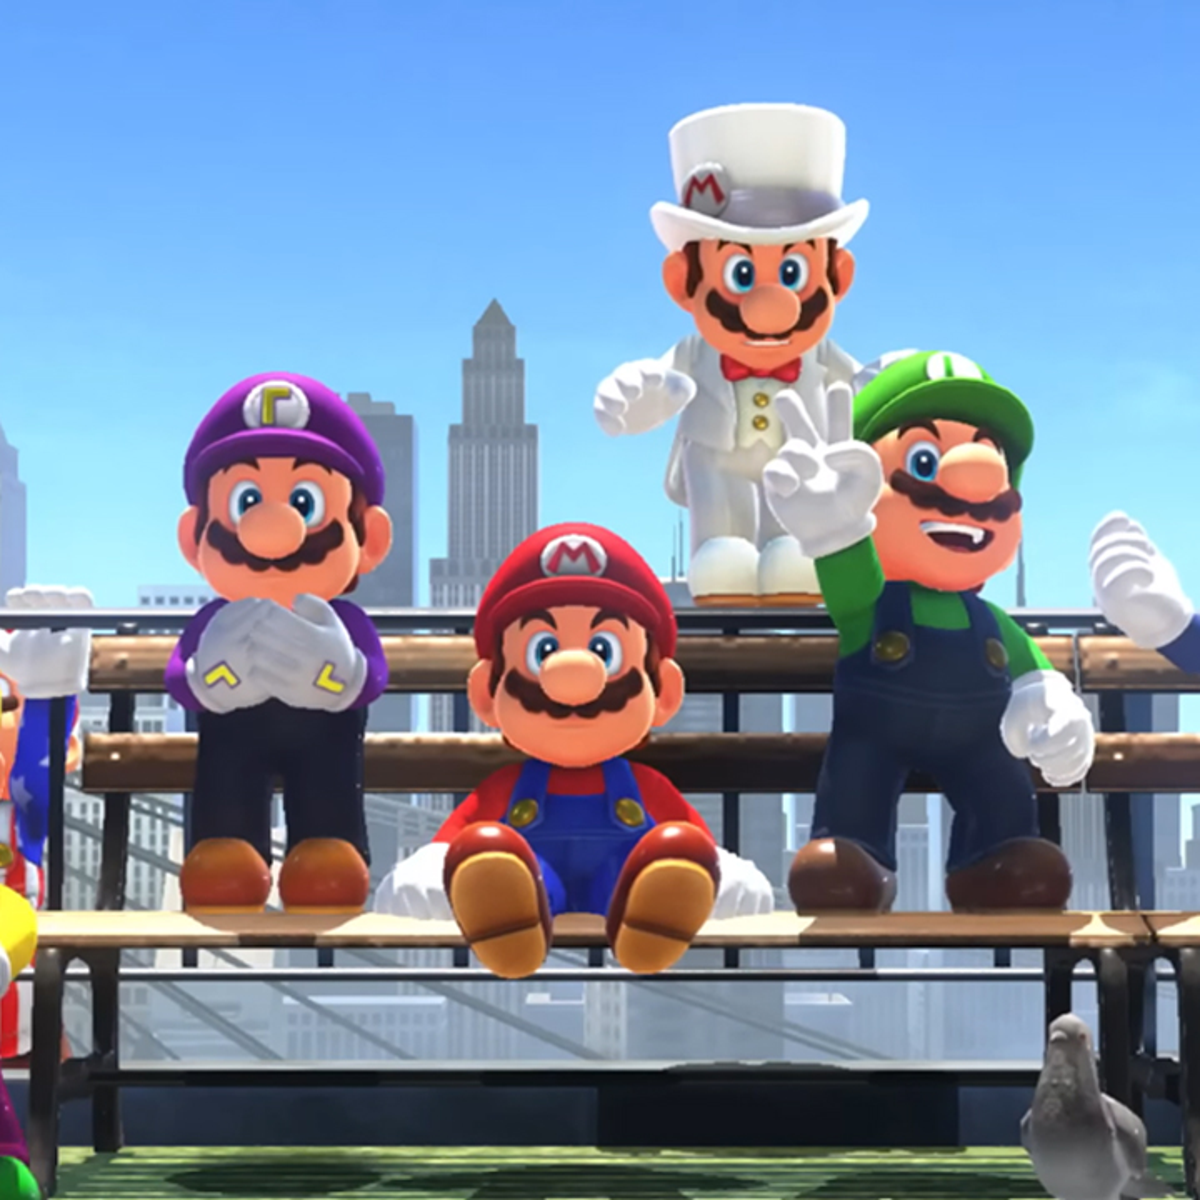 Super Mario Odyssey Co-Op Mode Demoed In New Footage